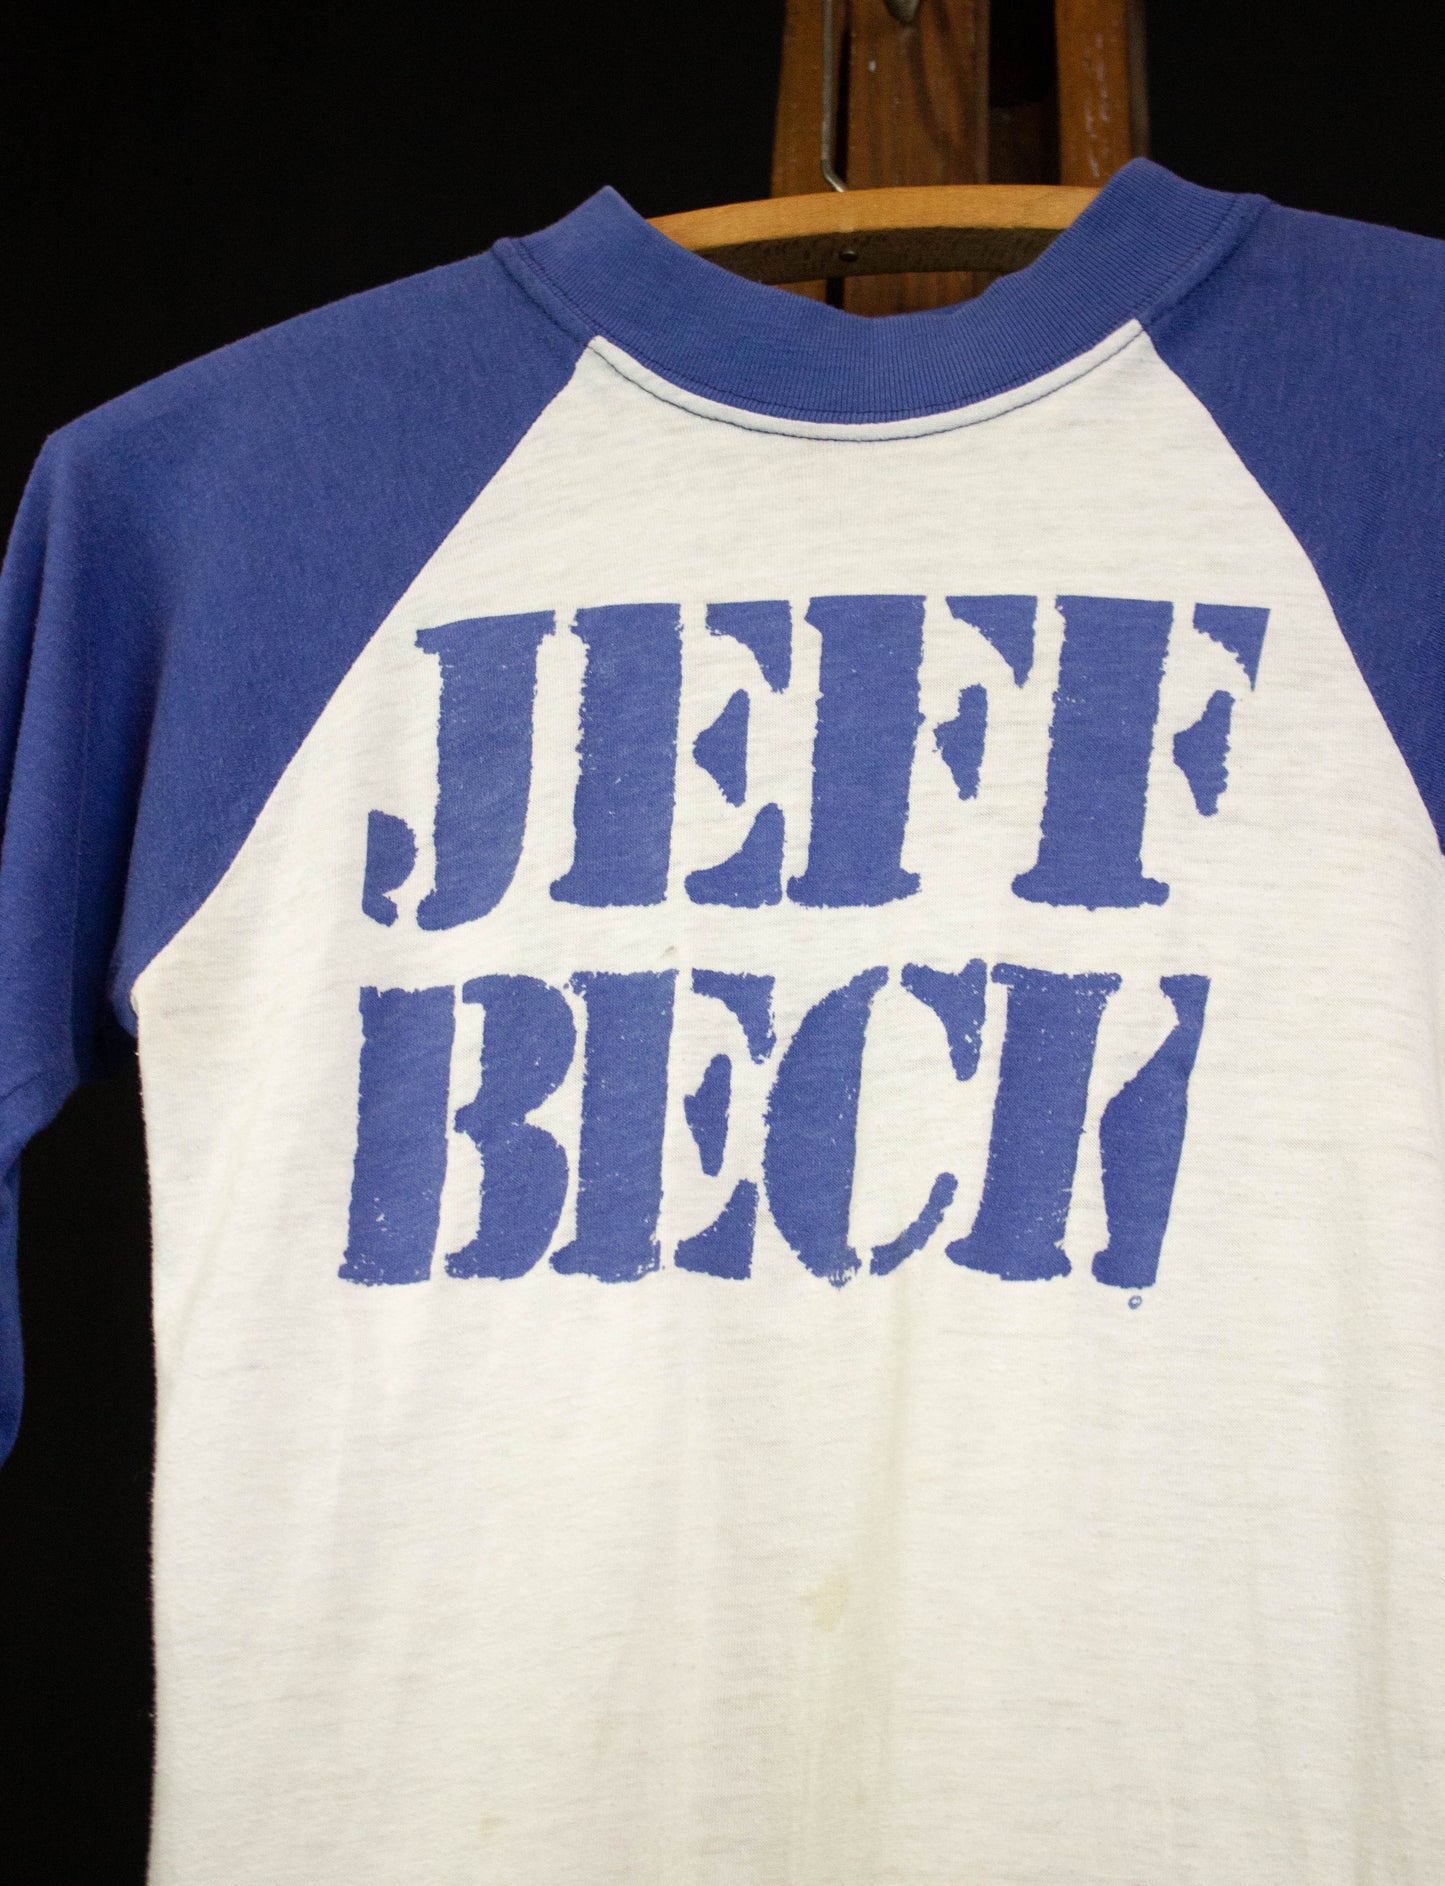 Vintage 1980 Jeff Beck There and Back Raglan Concert T Shirt Blue and White XS